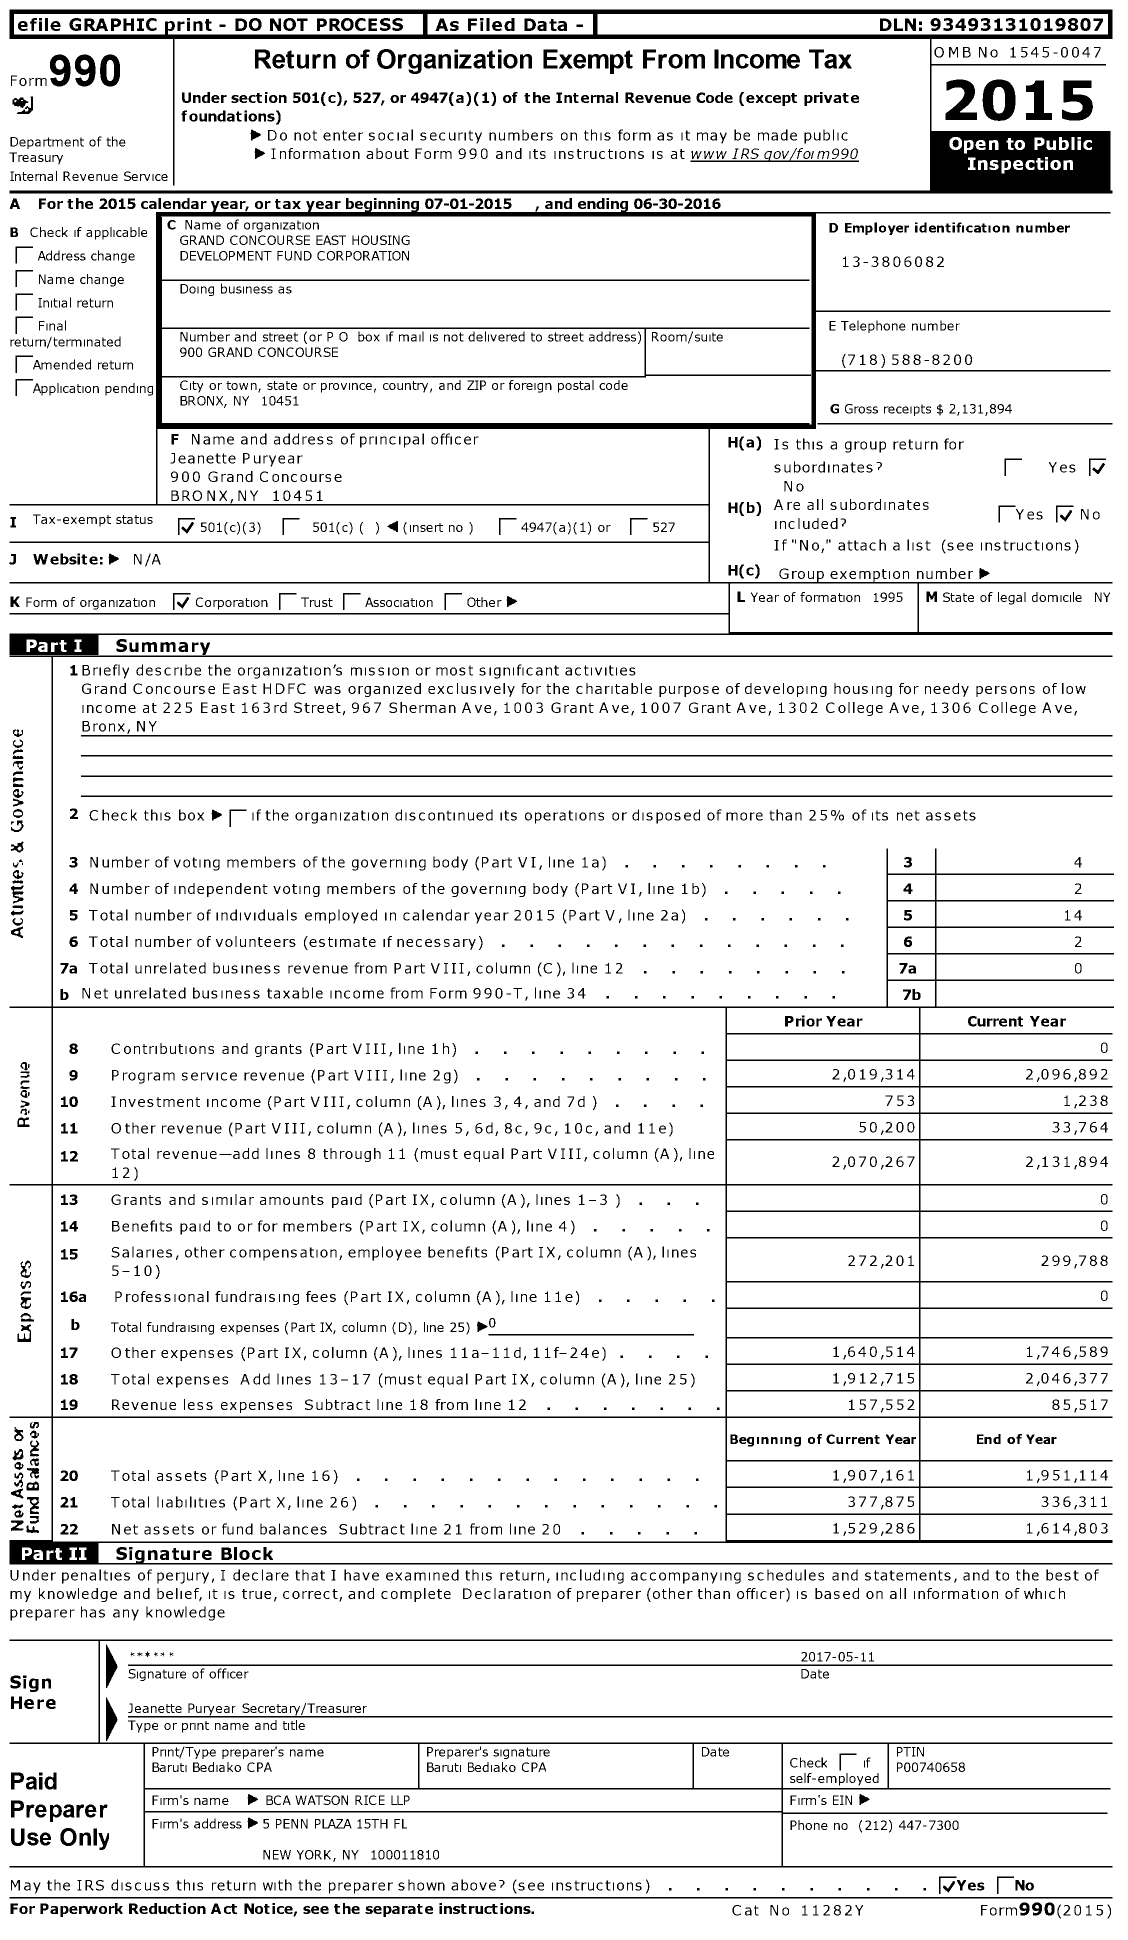 Image of first page of 2015 Form 990 for Grand Concourse East Housing Development Fund Corporation